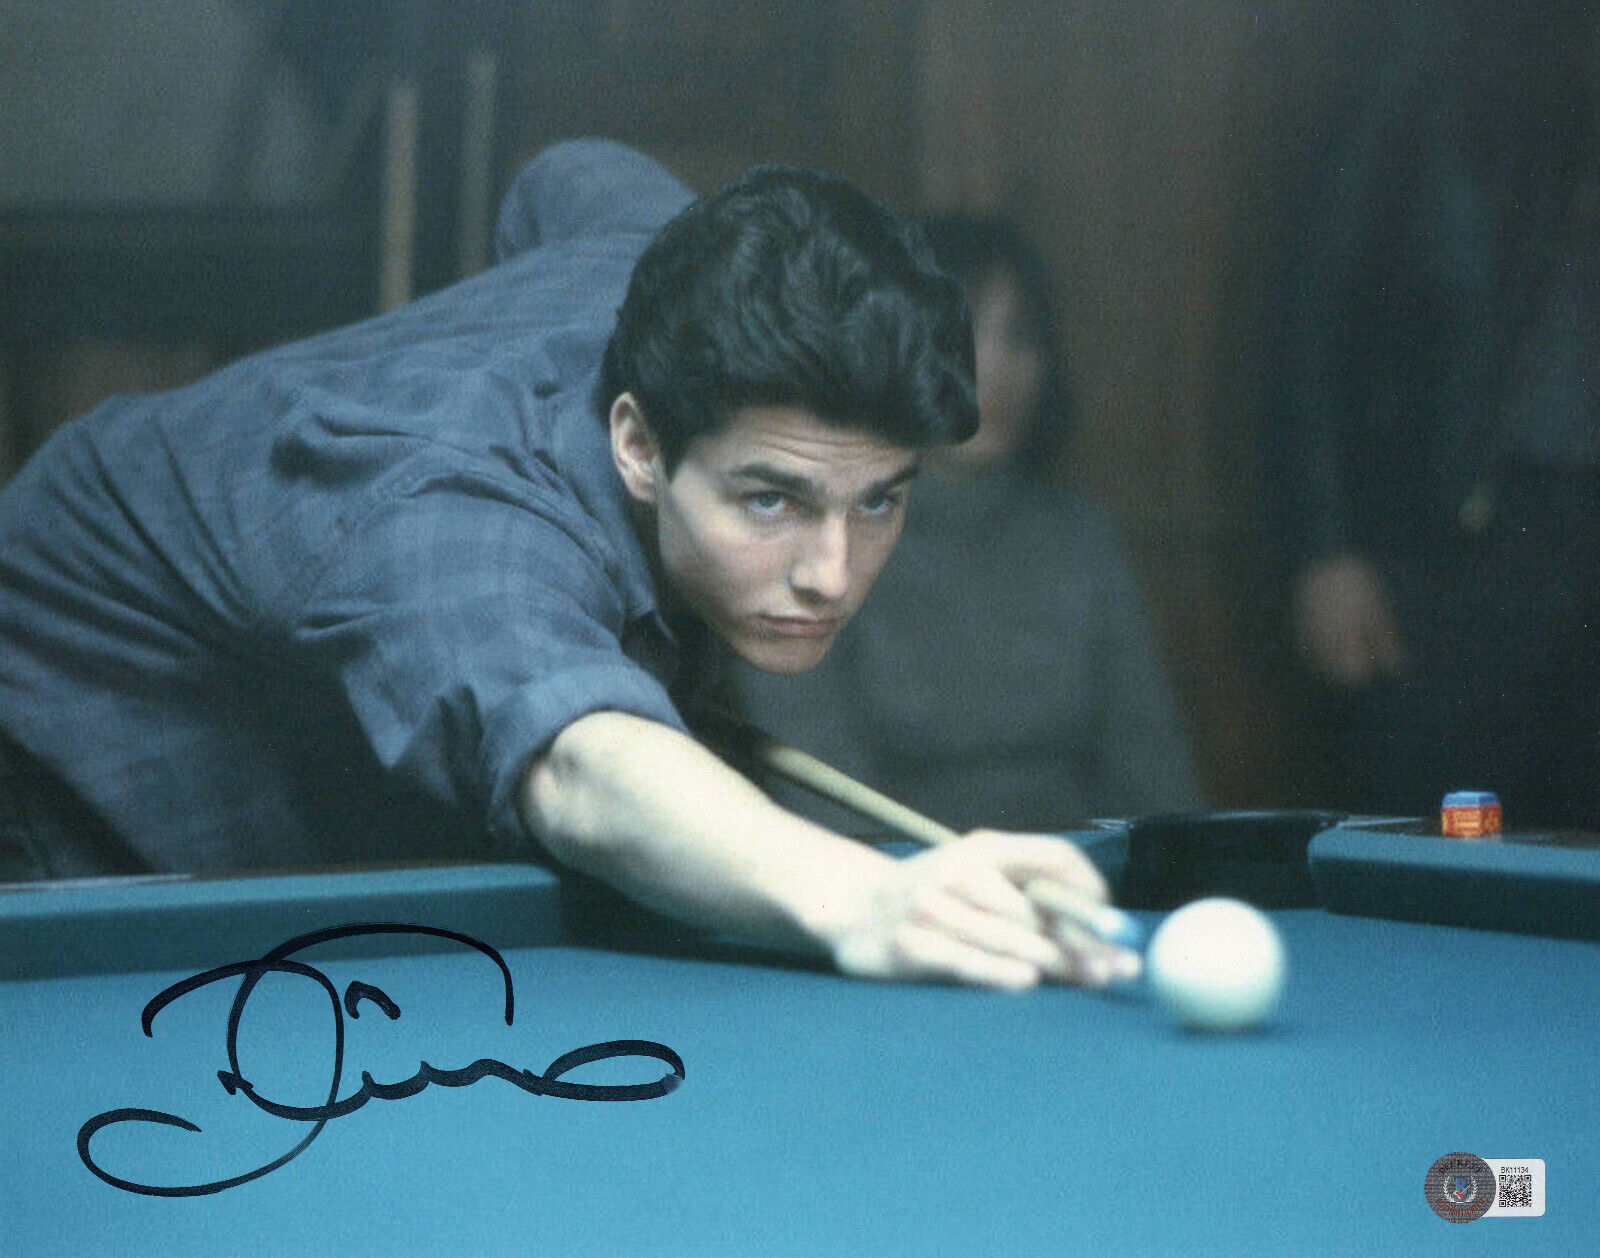 TOM CRUISE SIGNED AUTOGRAPH THE COLOR OF MONEY 11X14 PHOTO BECKETT BAS